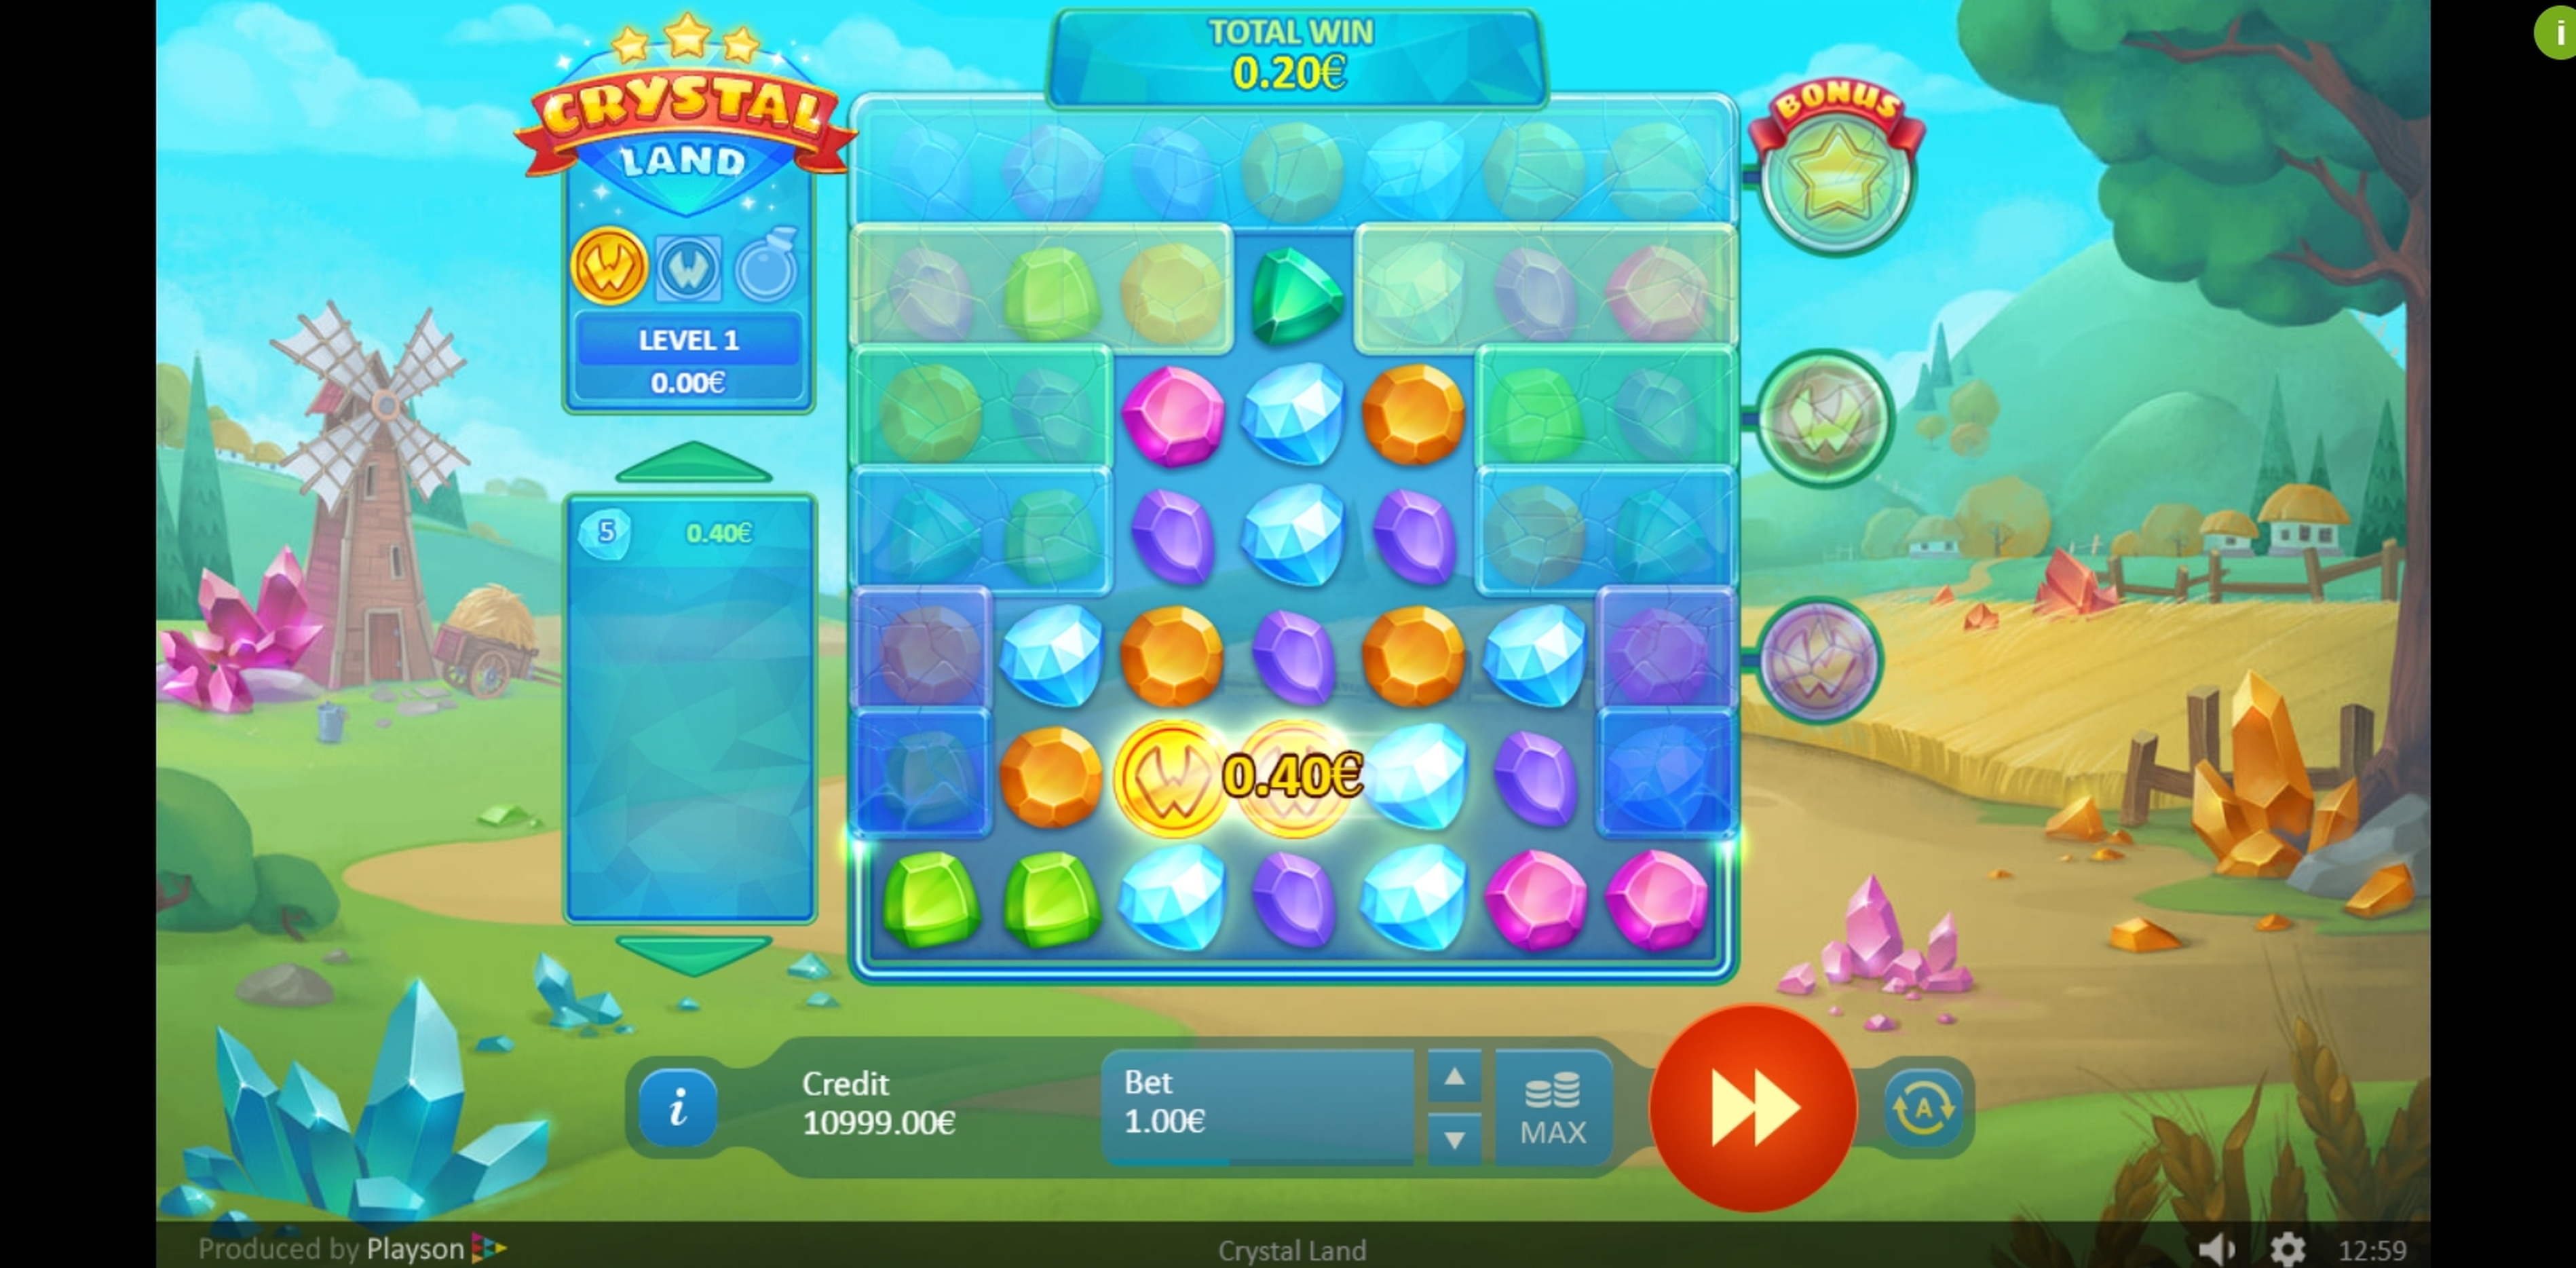 Win Money in Crystal Land Free Slot Game by Playson